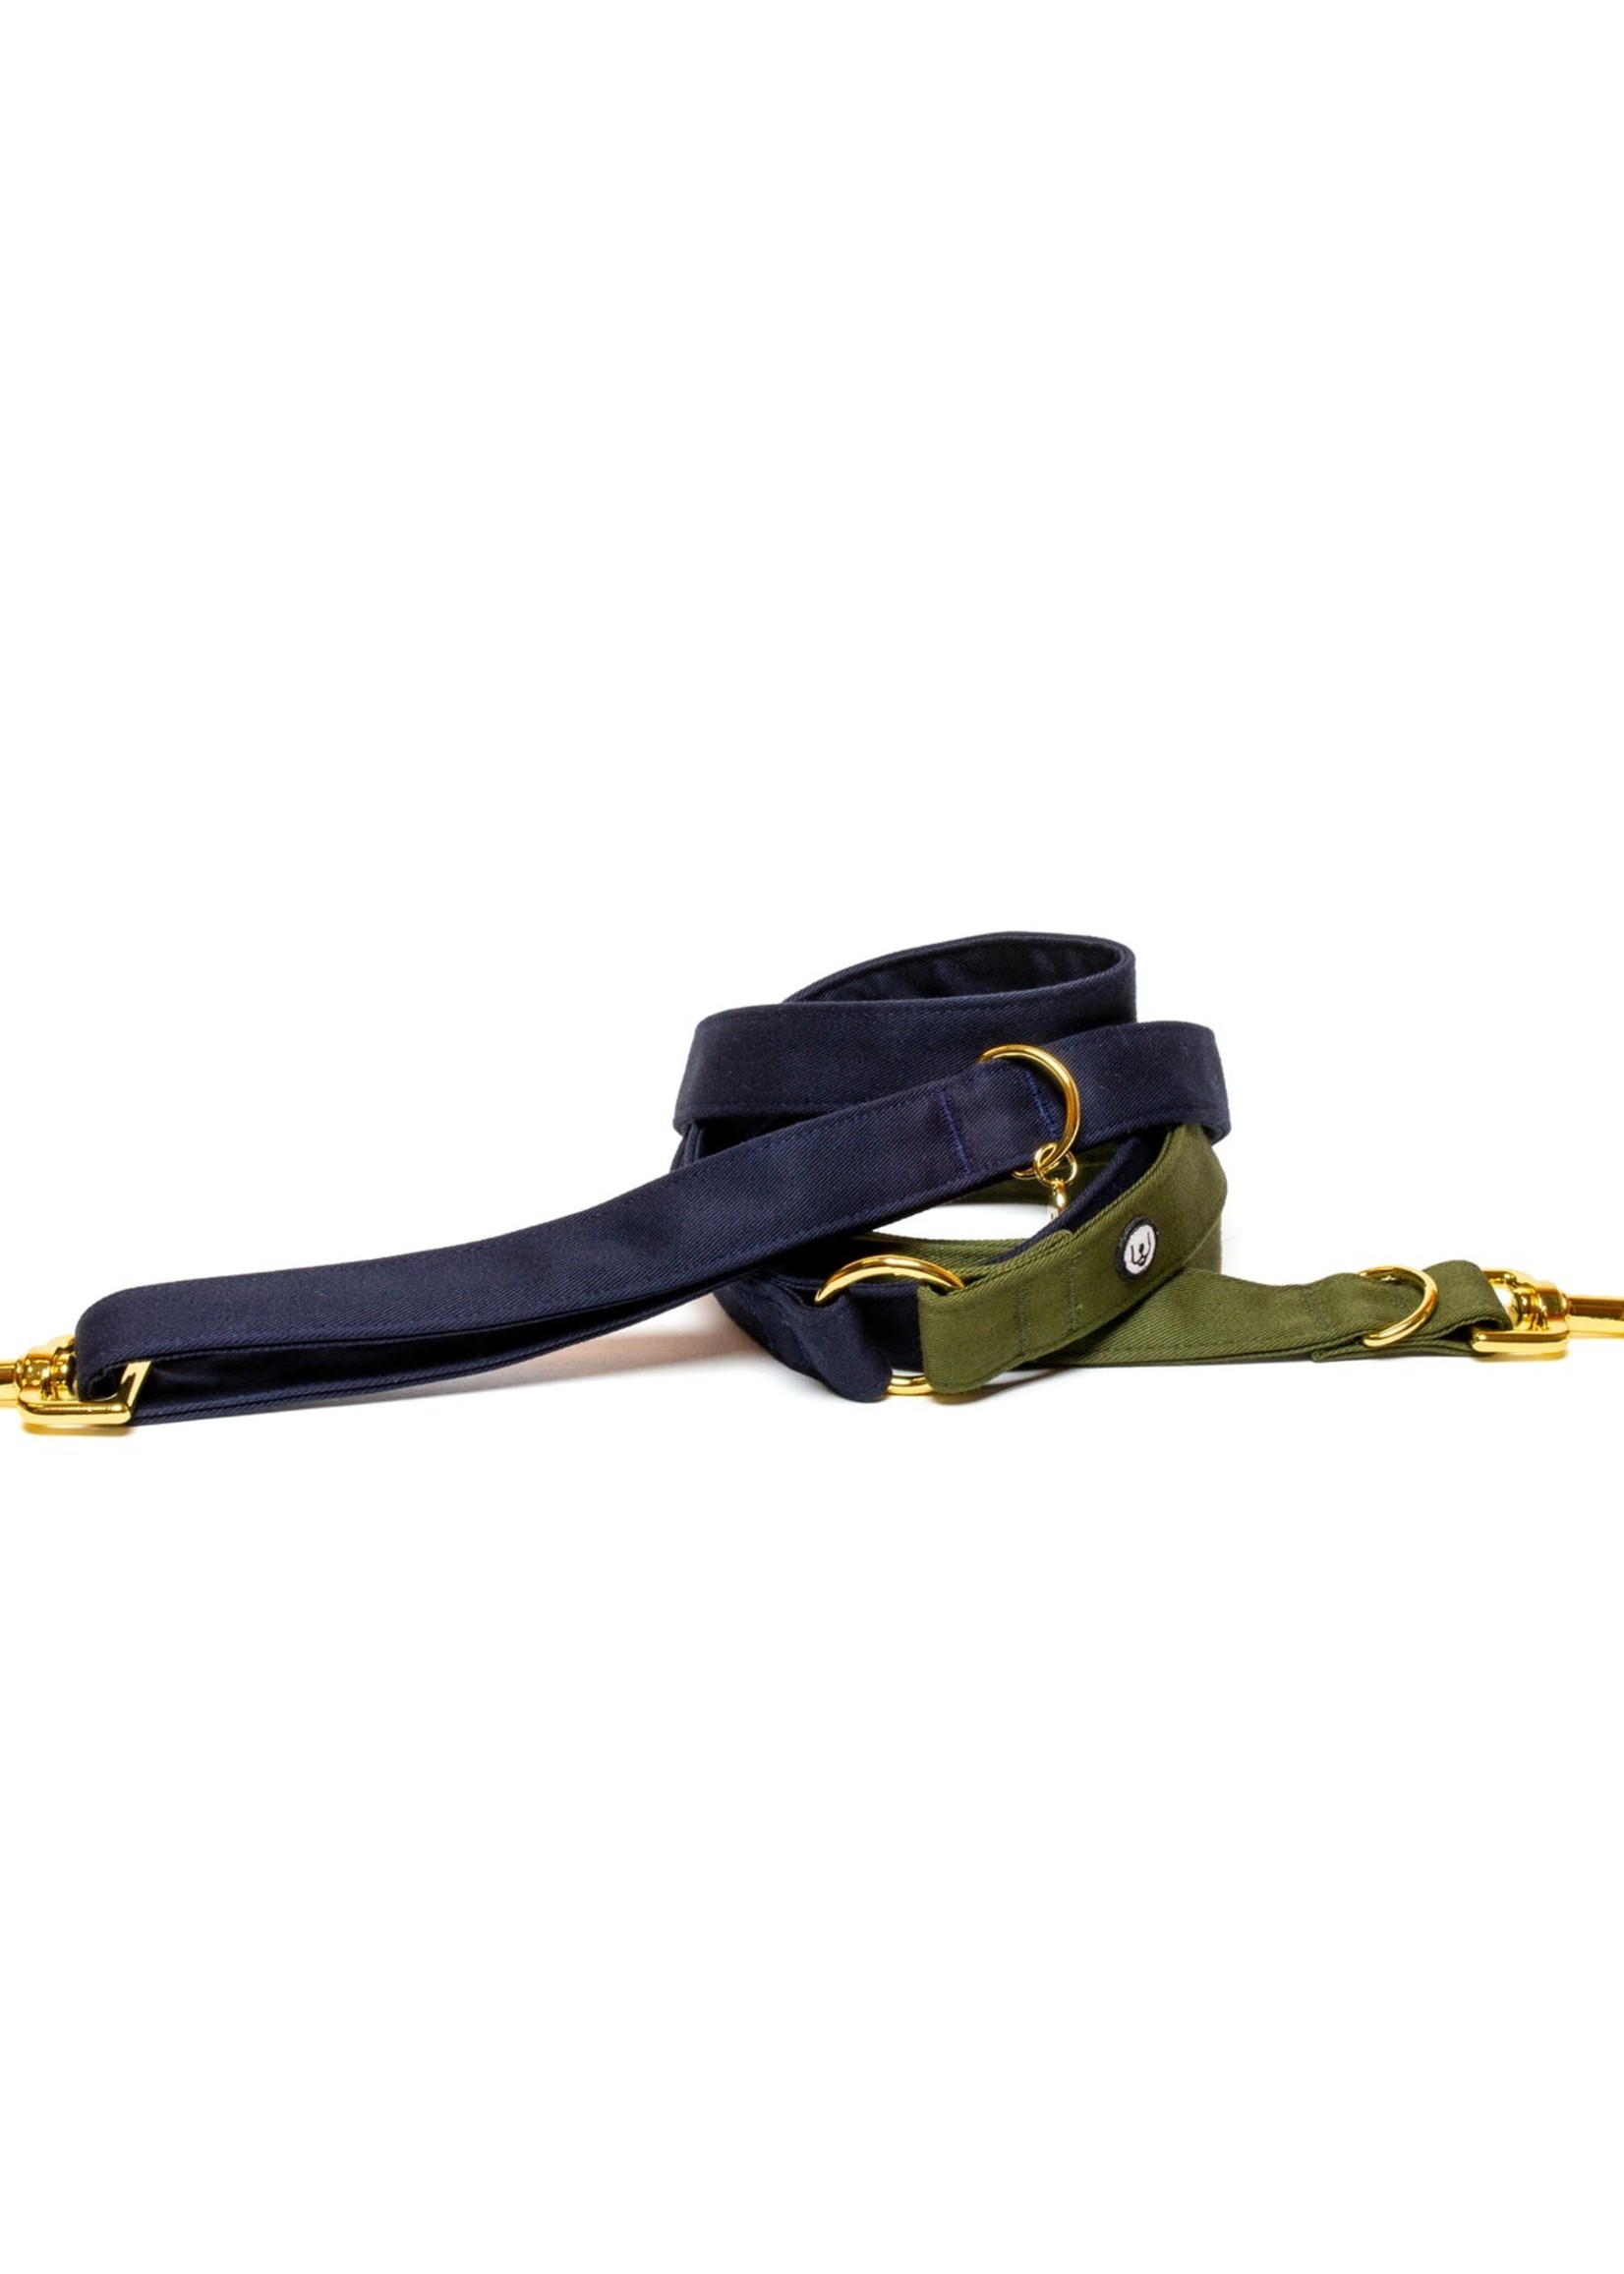 Eat Play Wag Eat Play Wag - Navy Olive Convertible Leash